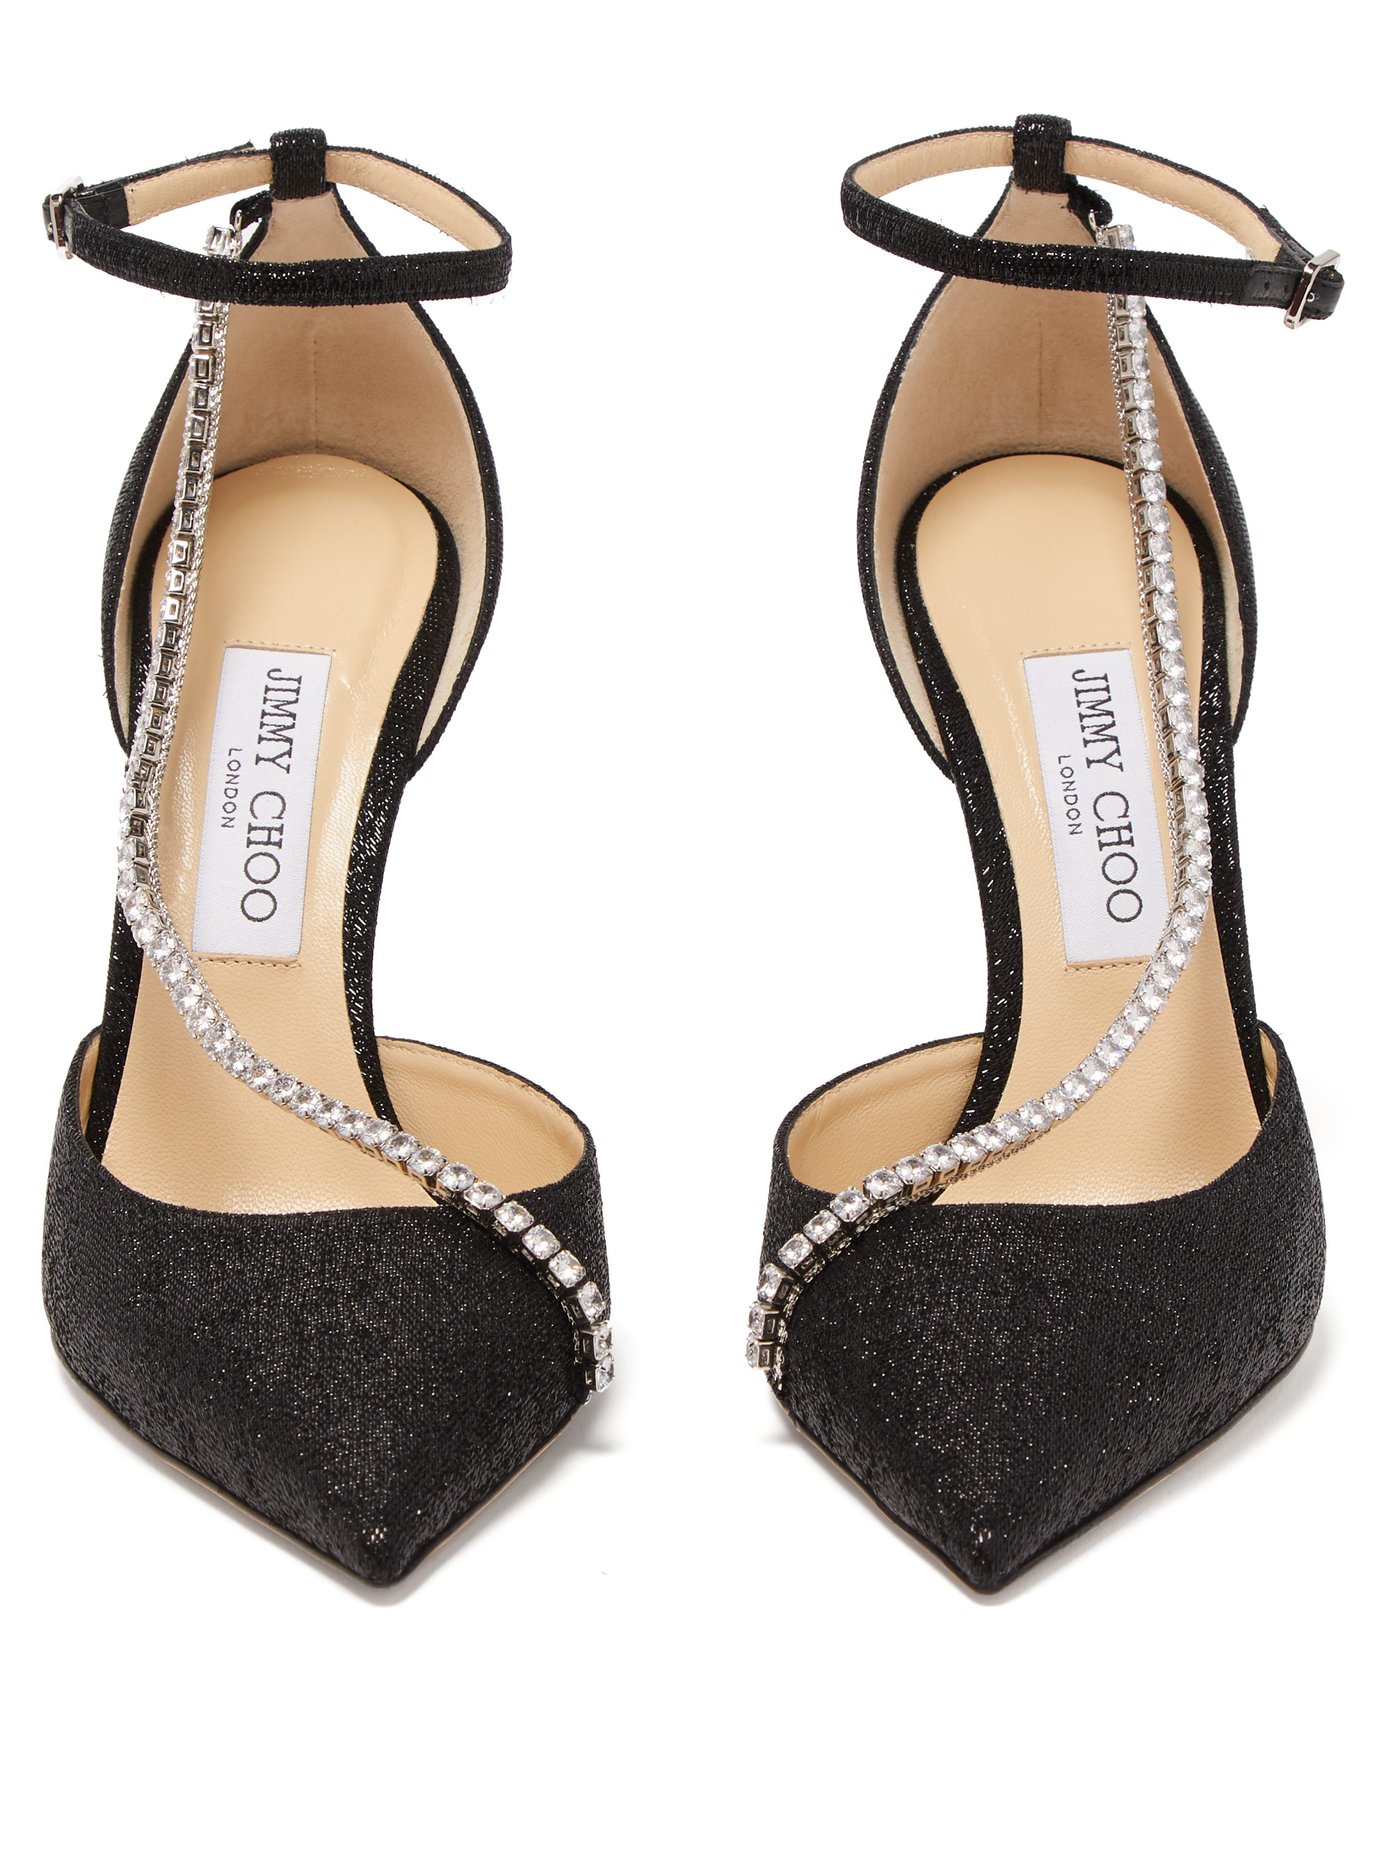 Jimmy Choo Talika 85 Black Suede Sandals With Crystal Chain | ModeSens